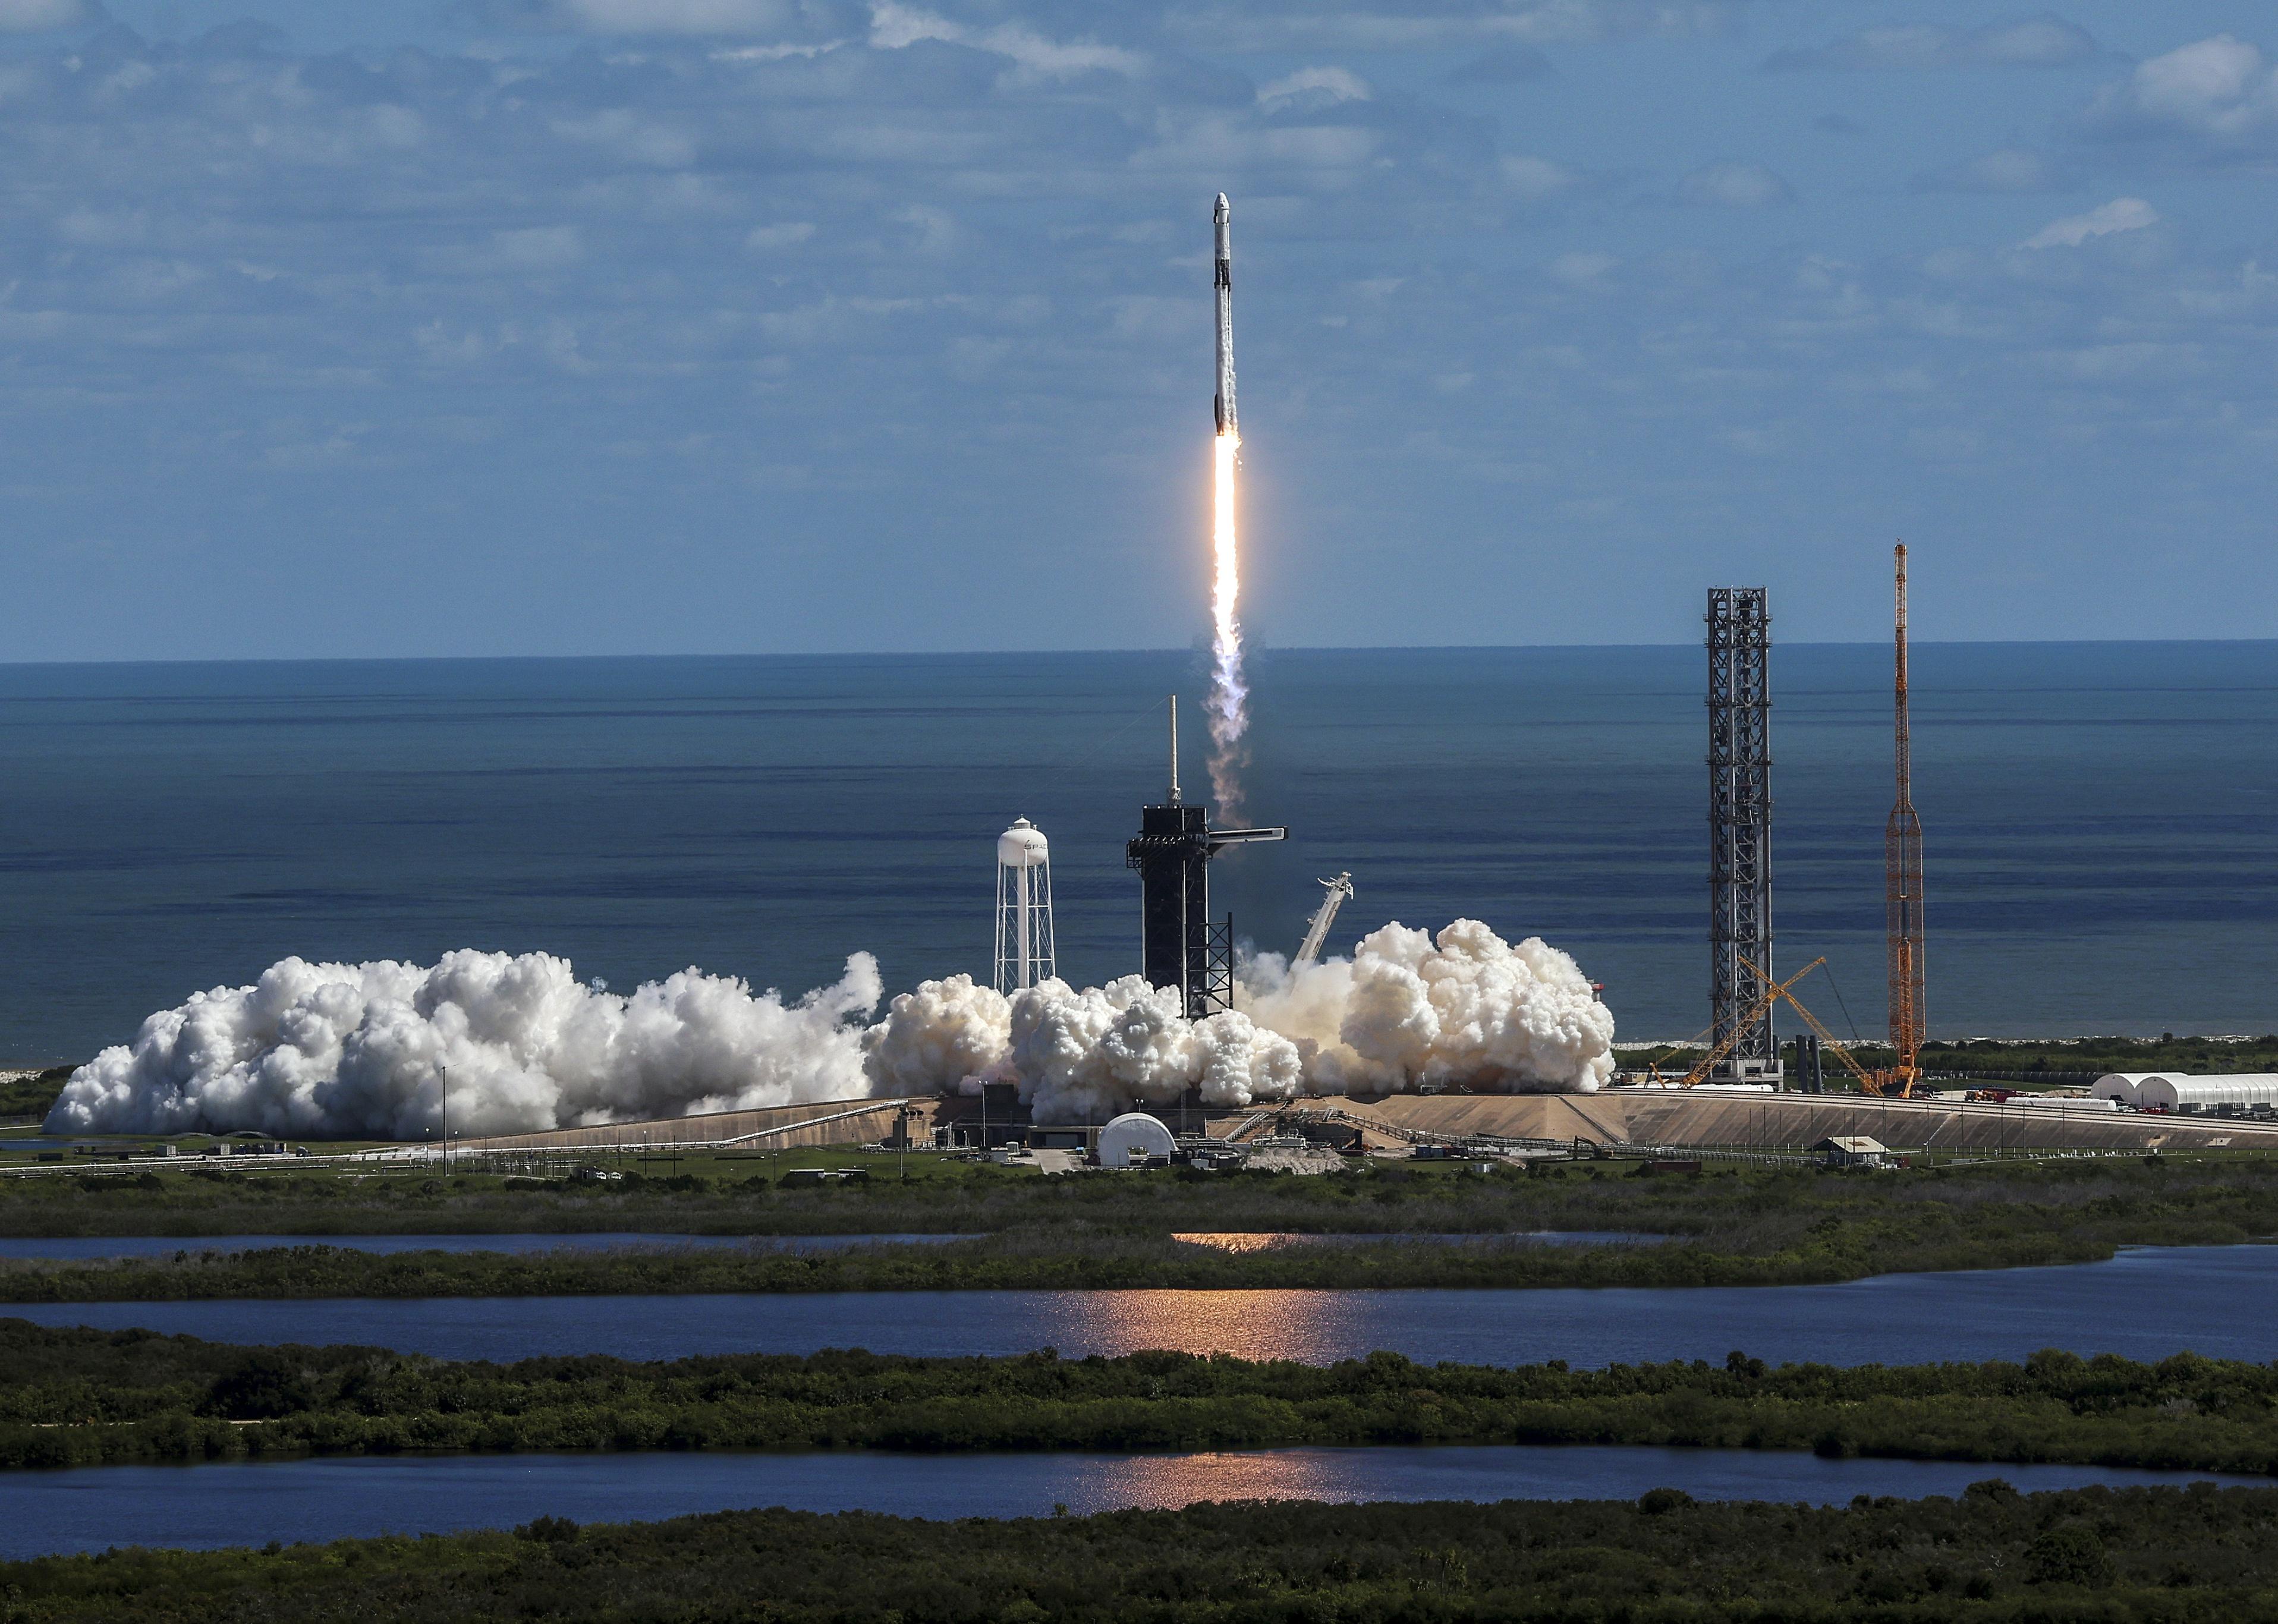 SpaceX’s Falcon 9 rocket with the Dragon spacecraft atop takes off at NASA